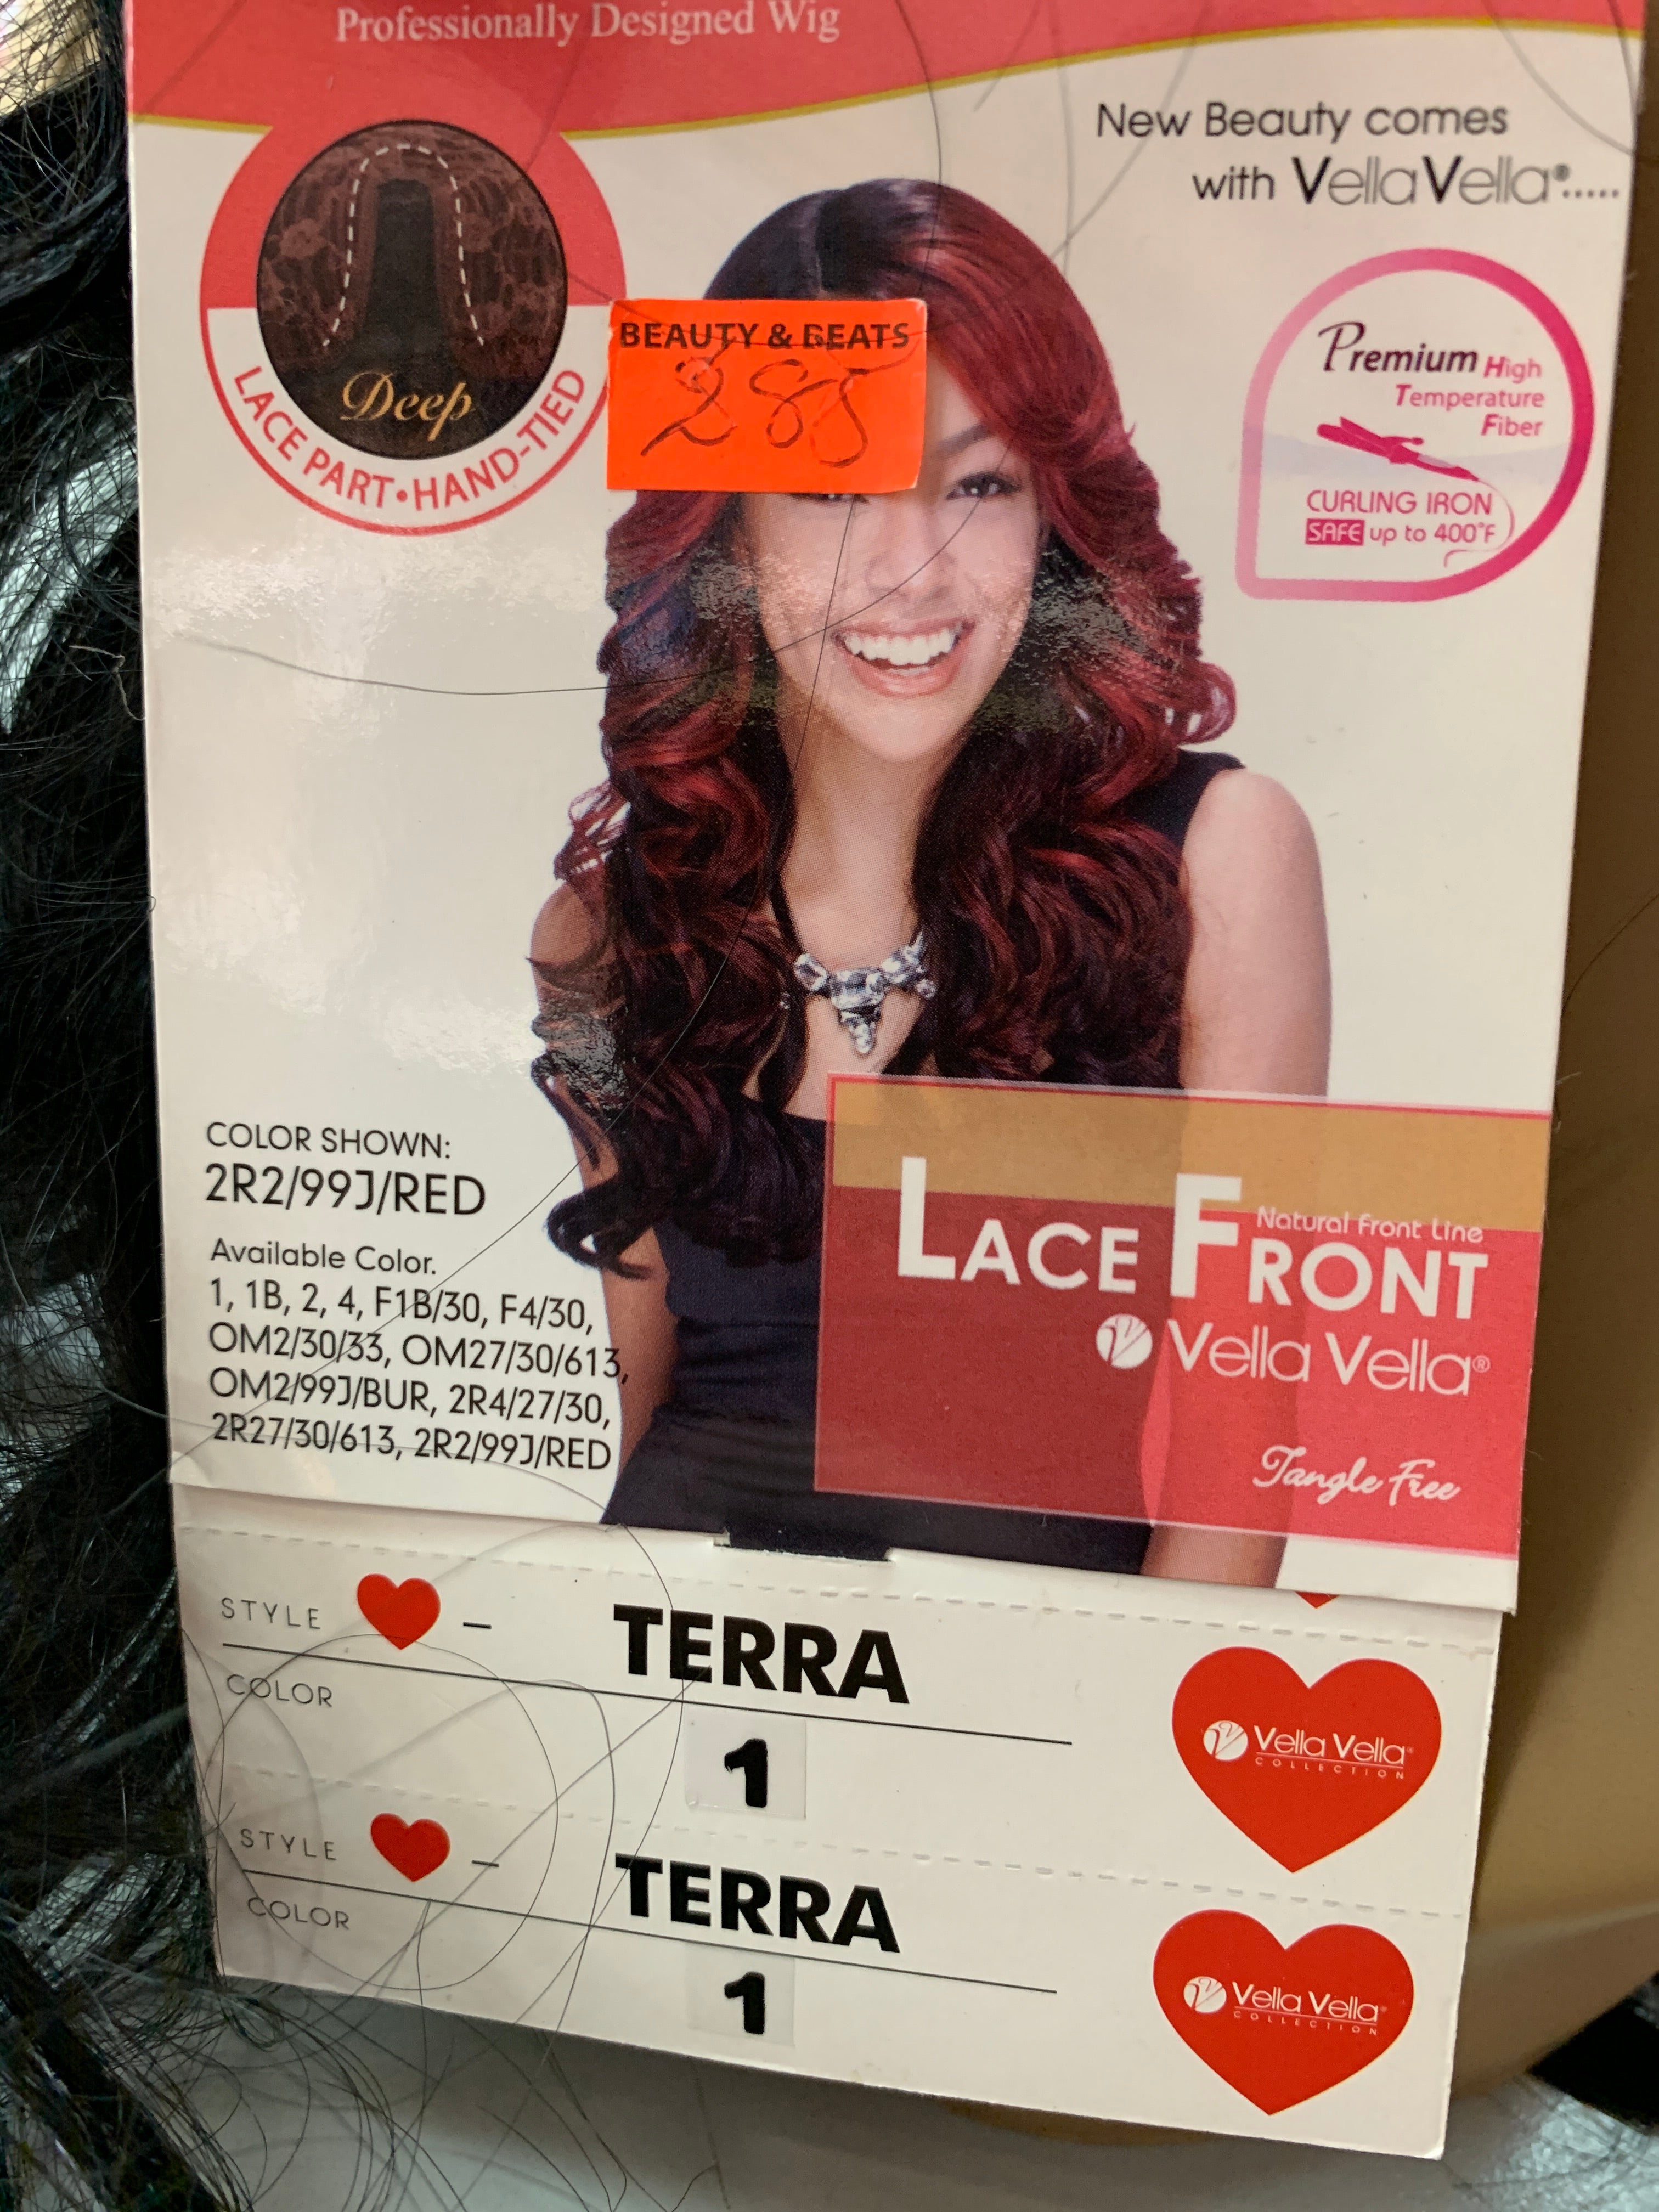 Sensual lace front Terra